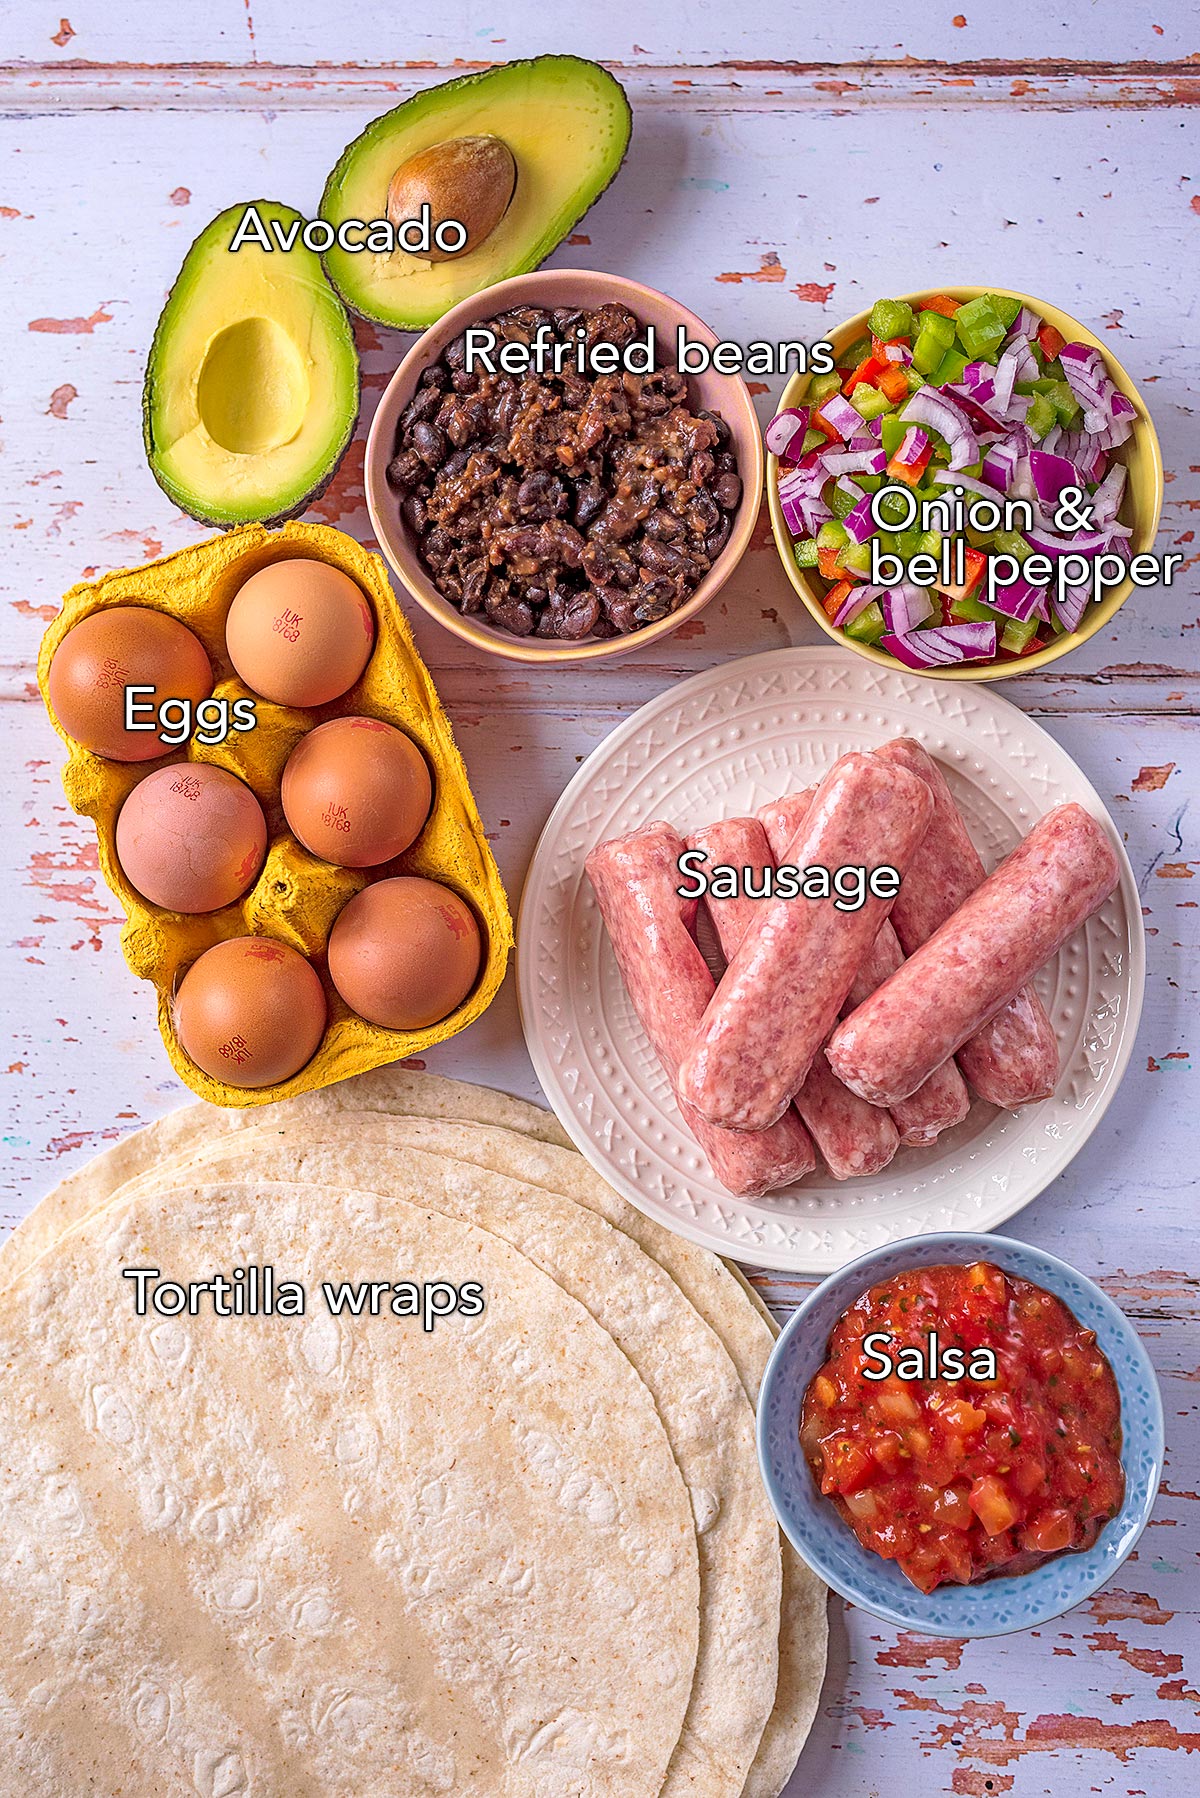 Ingredients needed for this burrito recipe with text overlay labels.